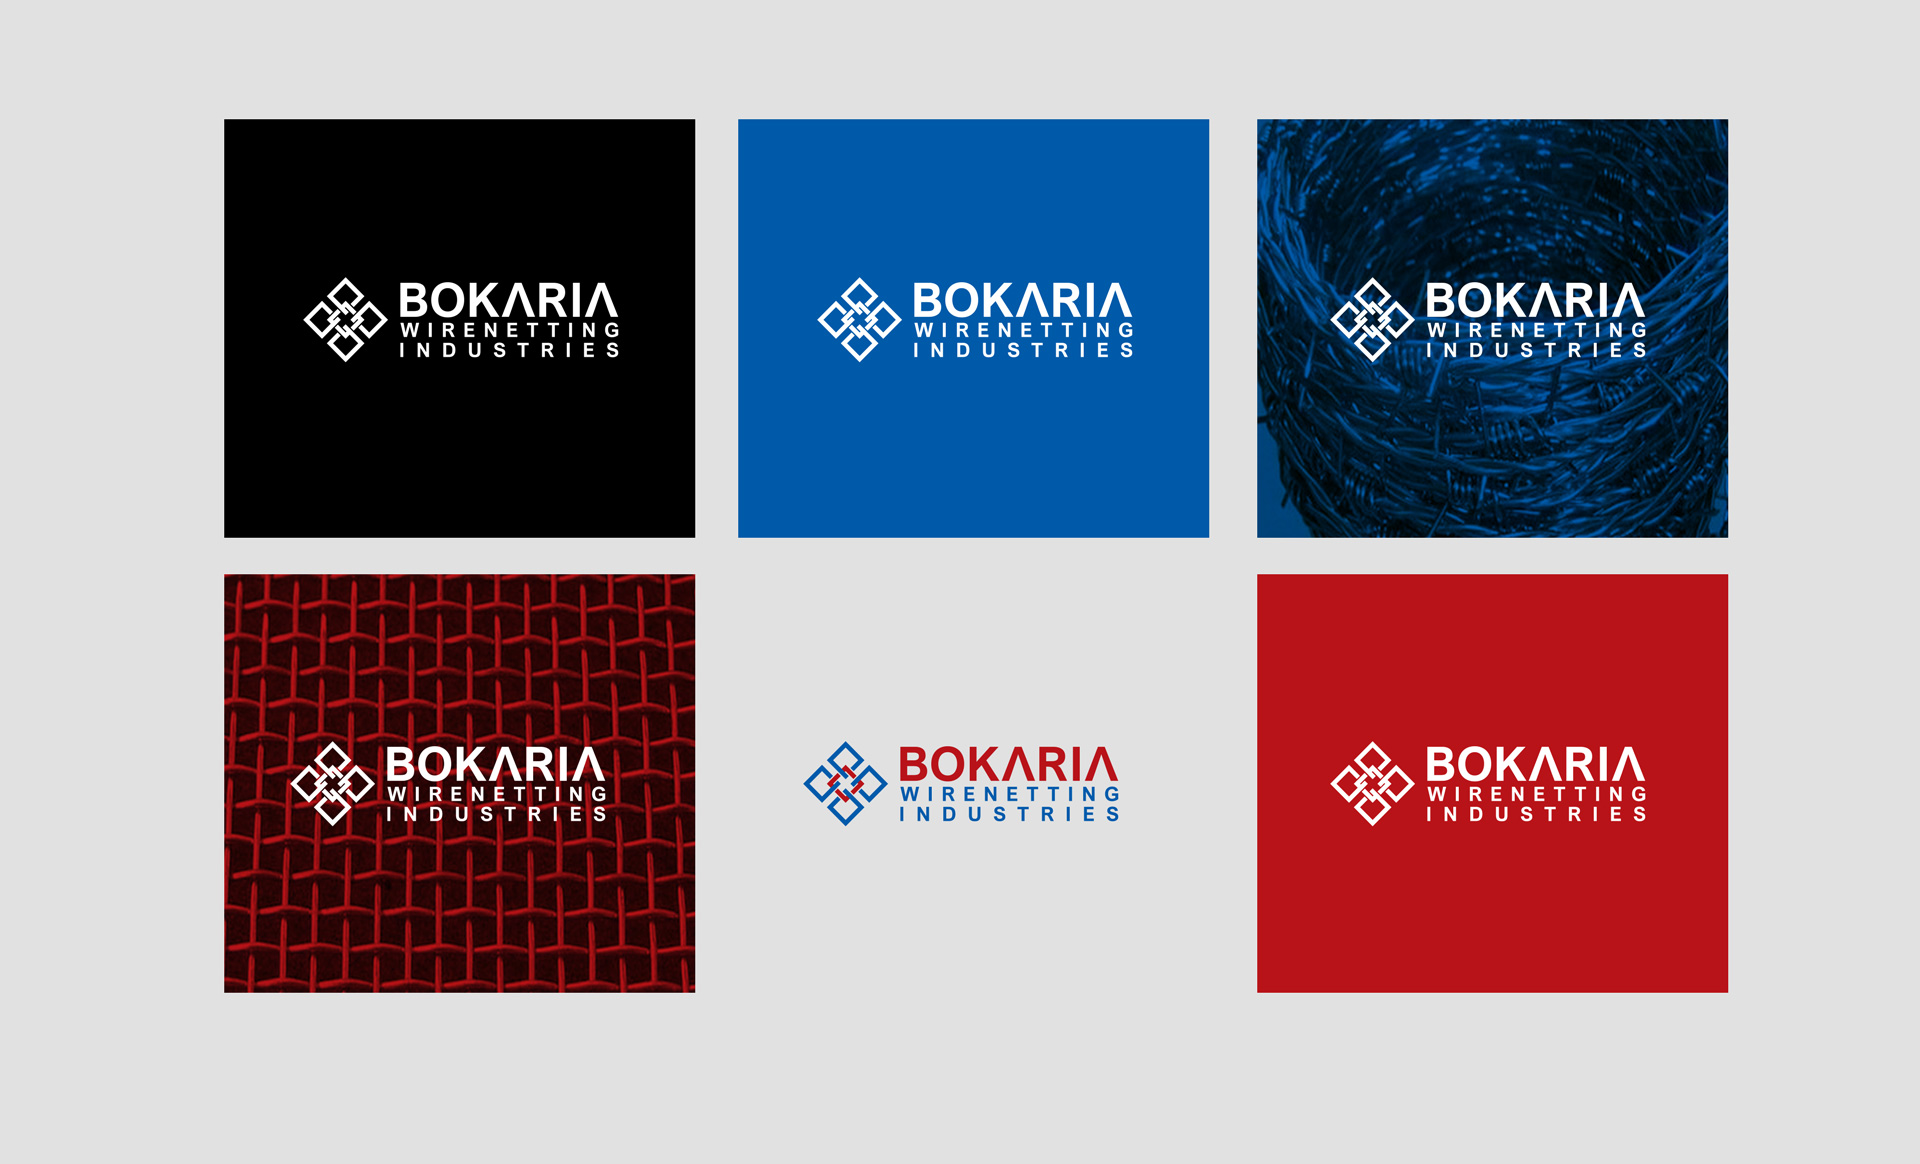 brand-strategy-positioning-naming-services-industrial-manufacturing-company-chennai-bokaria-wirenetting-reinaphics-chennai